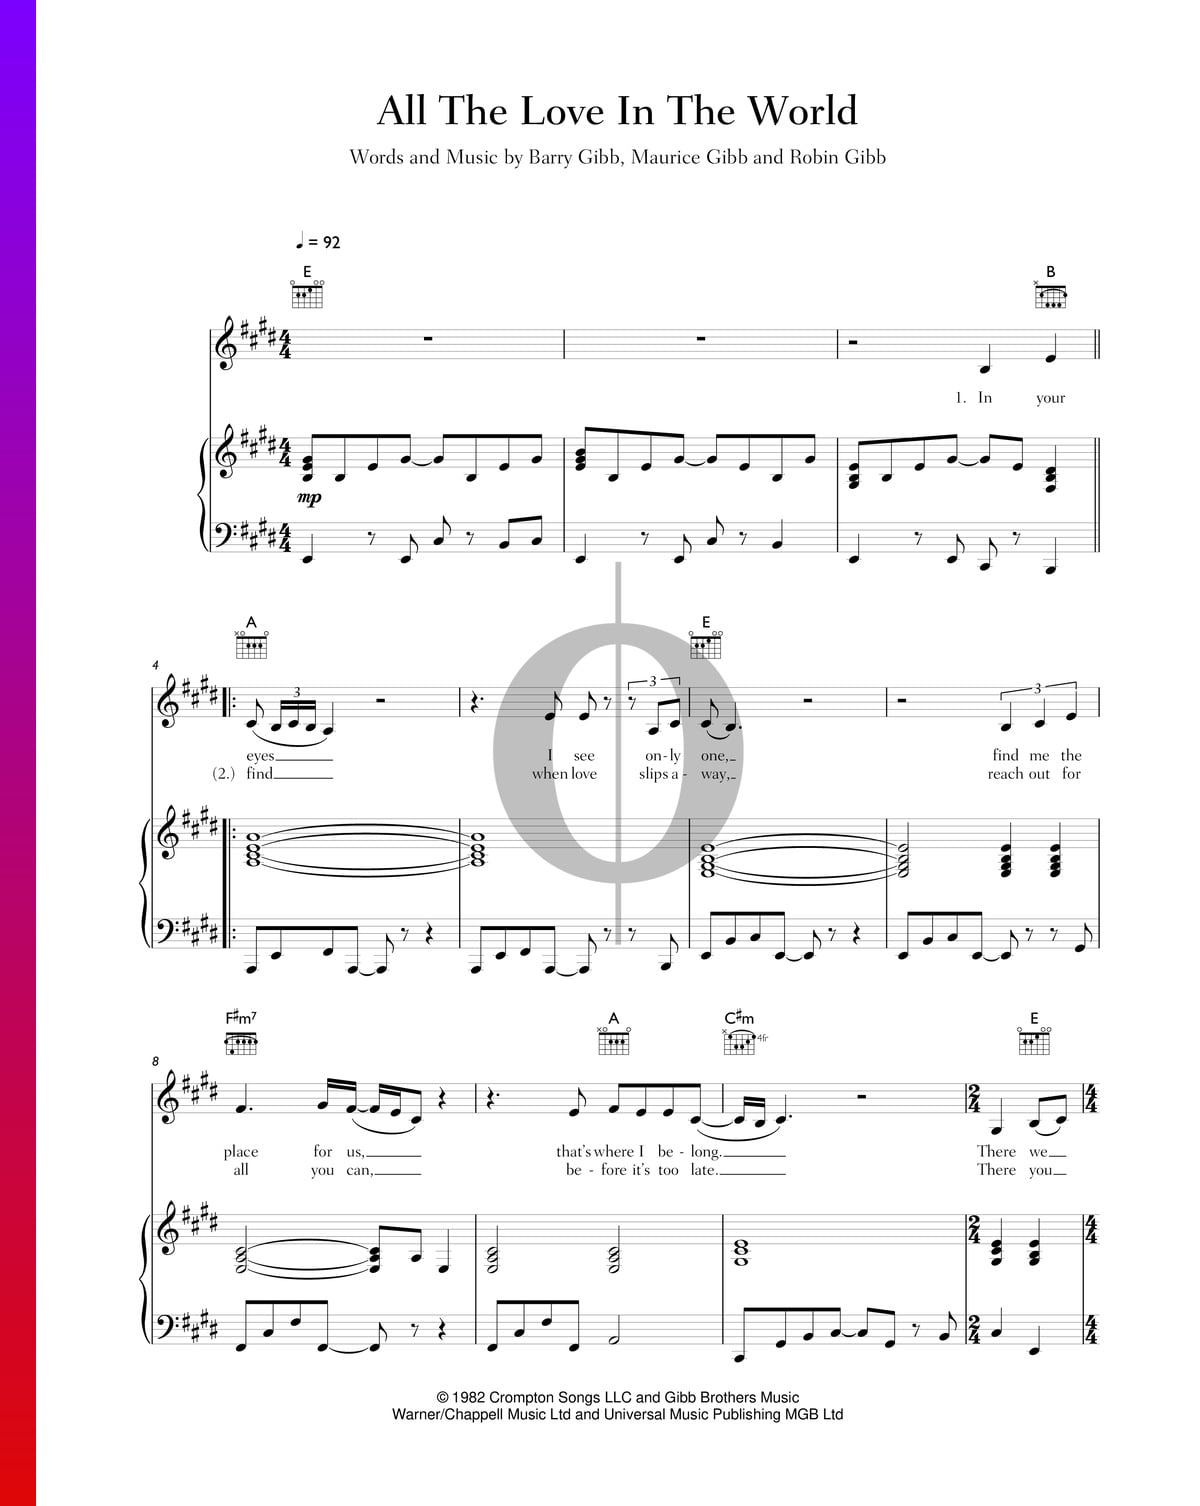 ▷ All The Love In The World Sheet Music (Piano, Voice, Guitar) - PDF  Download  Streaming - OKTAV